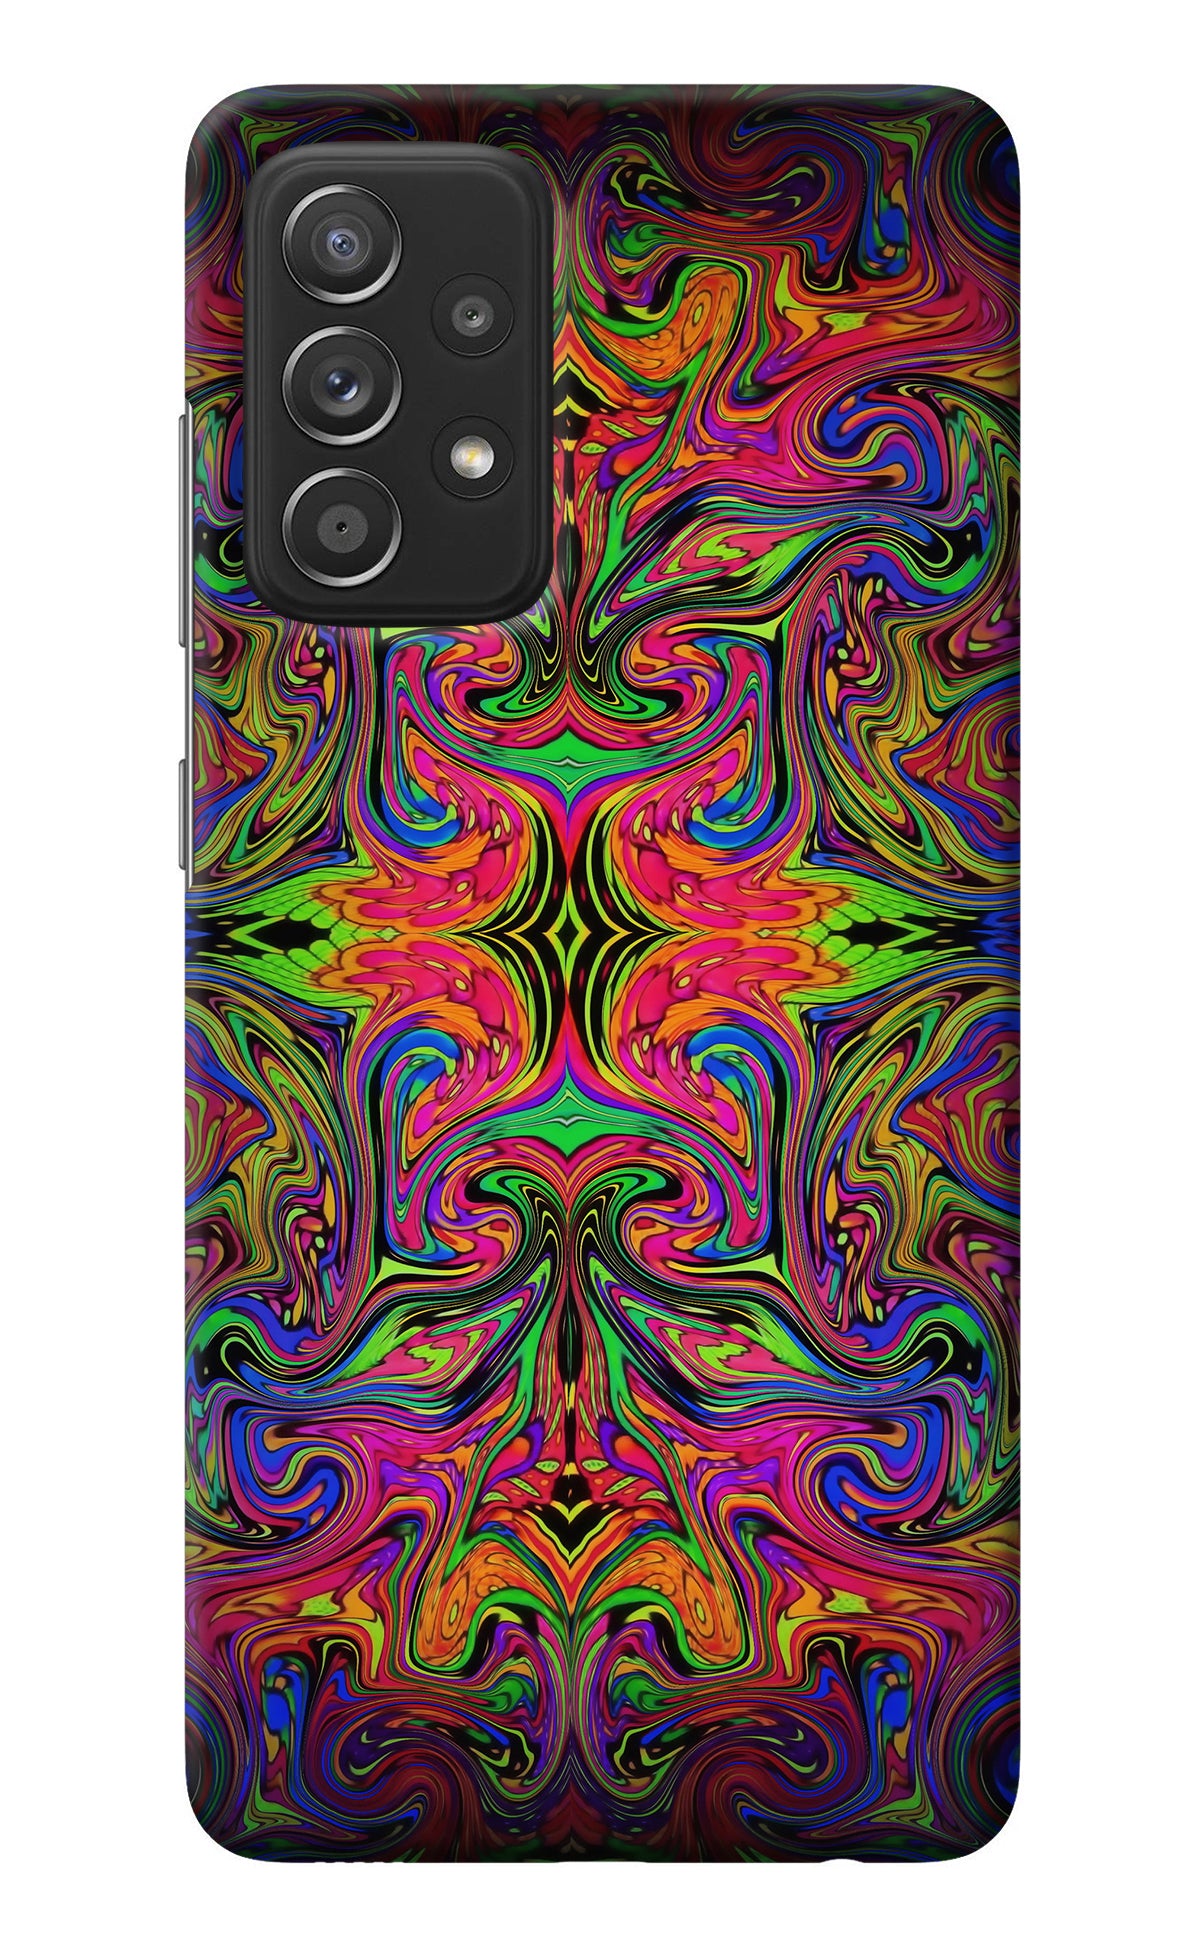 Psychedelic Art Samsung A52/A52s 5G Back Cover